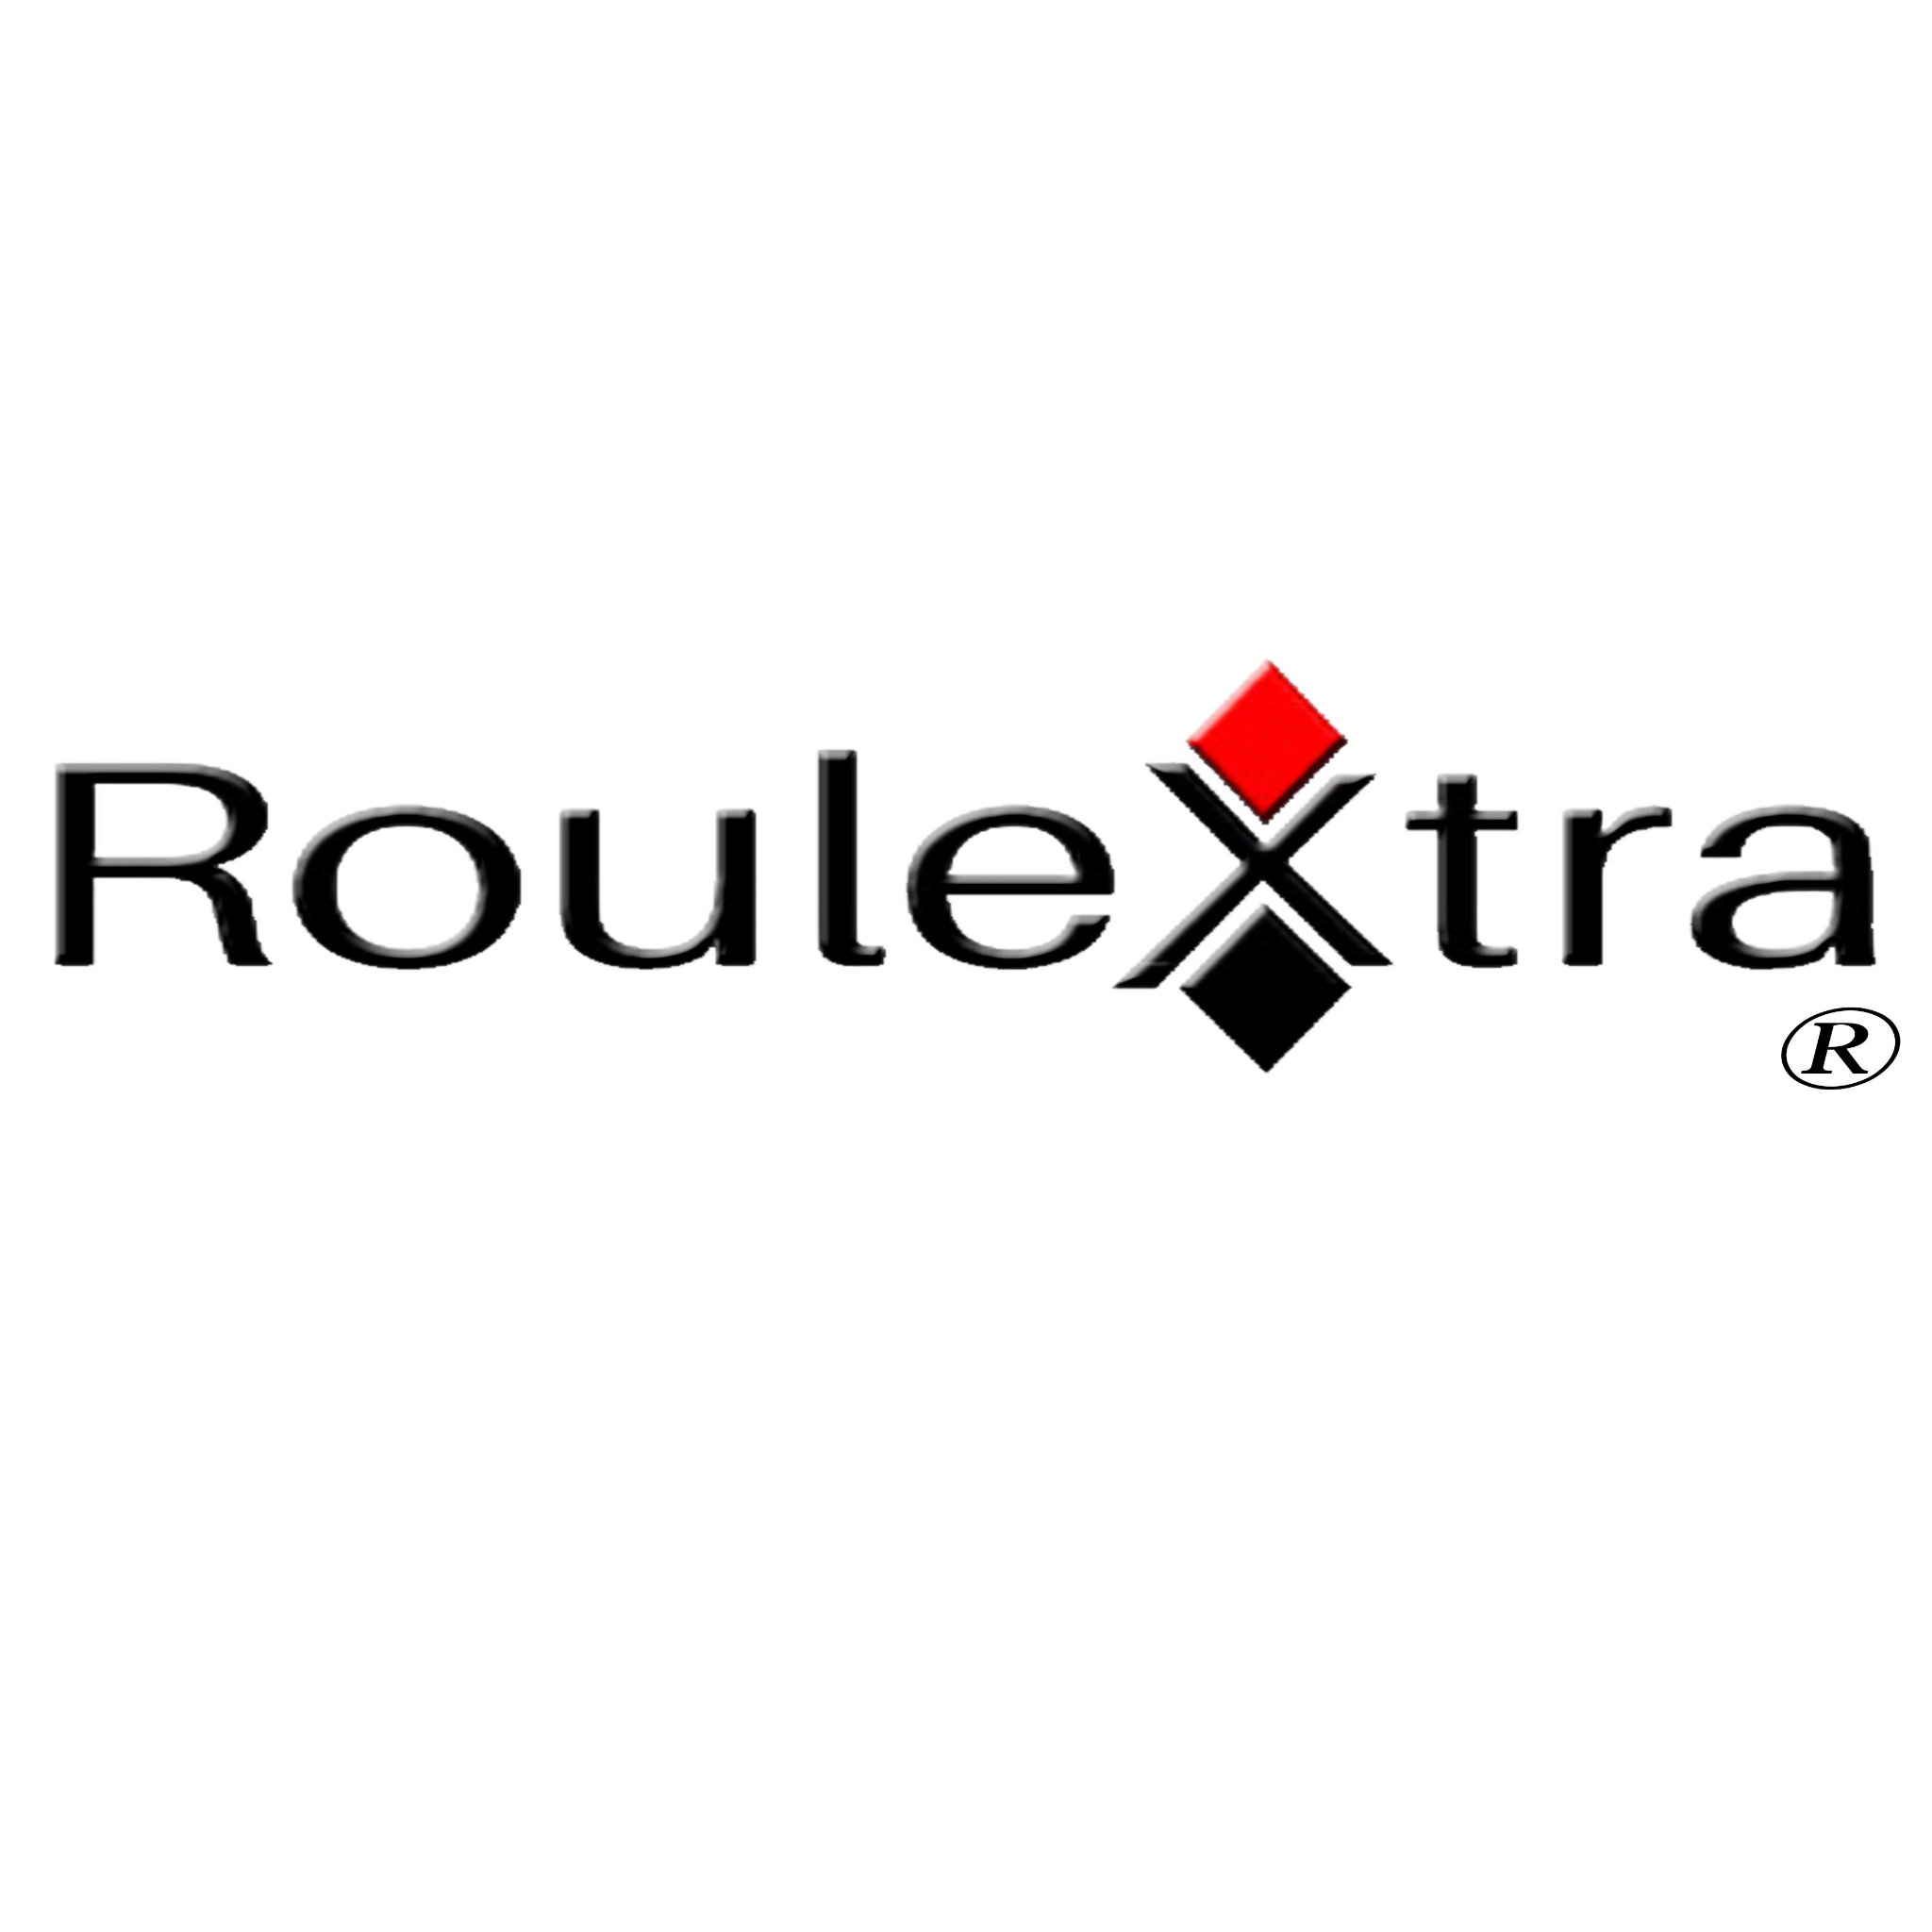 Roulextra is roulette with a twist ~ it provides players with DOUBLE the outside bets. Expands game play but critically retains the same house advantage + odds